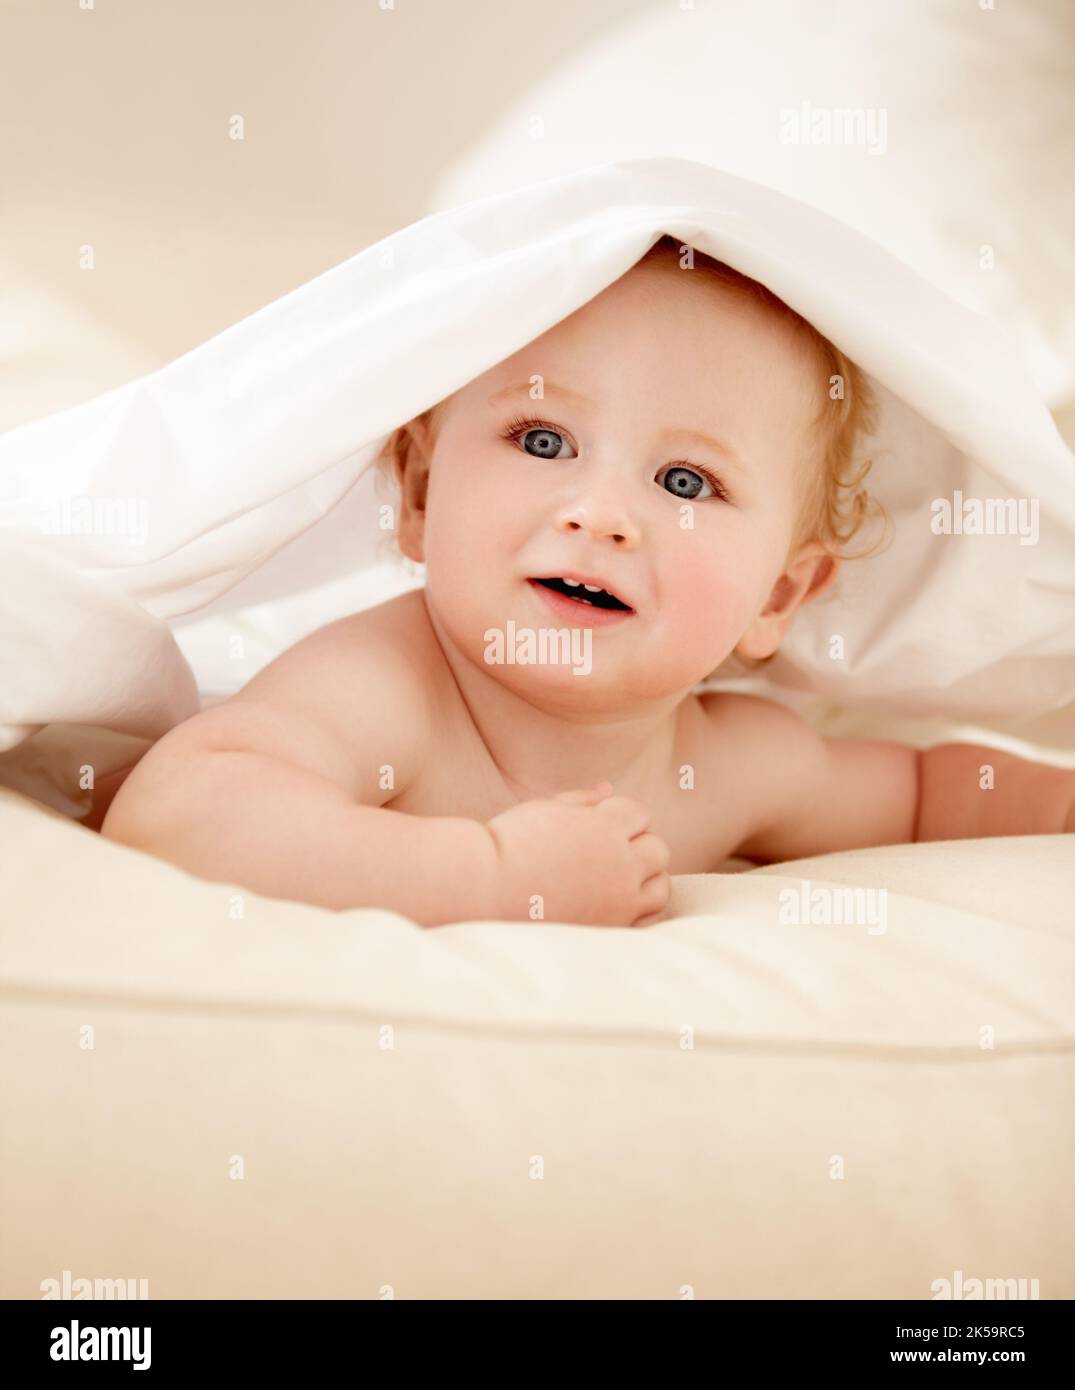 Exploring his world. Cute baby boy lying under a sheet playfully and looking away. Stock Photo